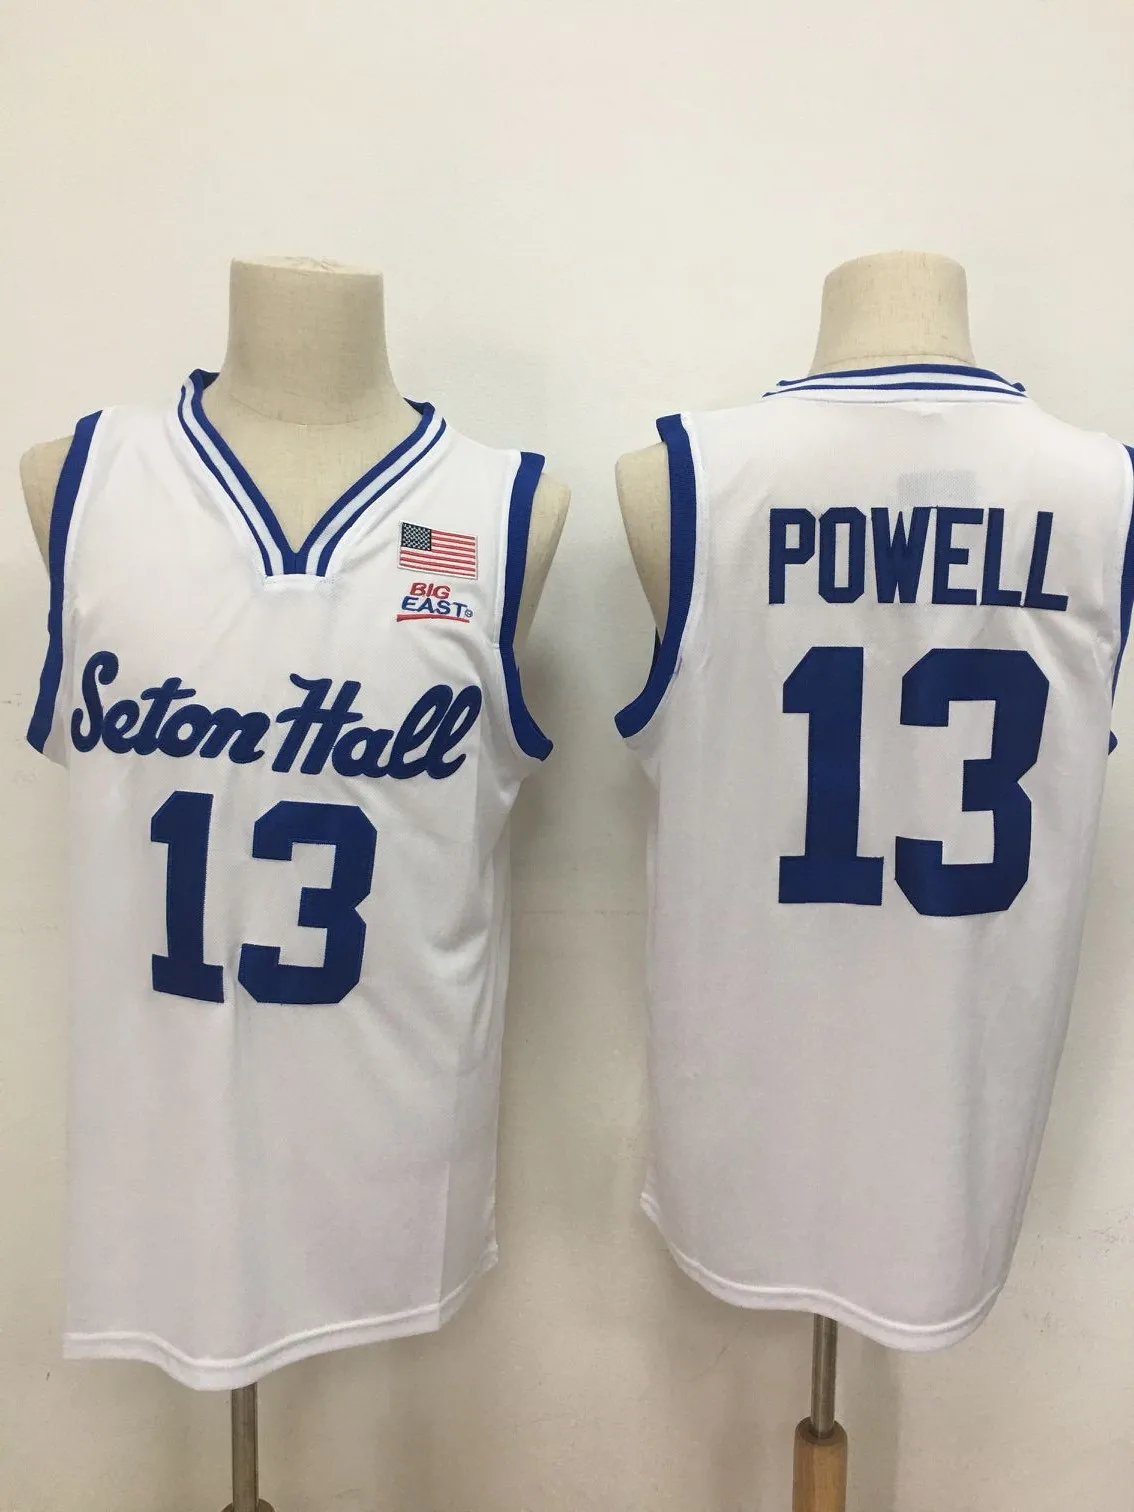 

Retro stitched embroidery Seton Hall Pirates #13 Myles Powell basketball jersey Customize any size number and player name